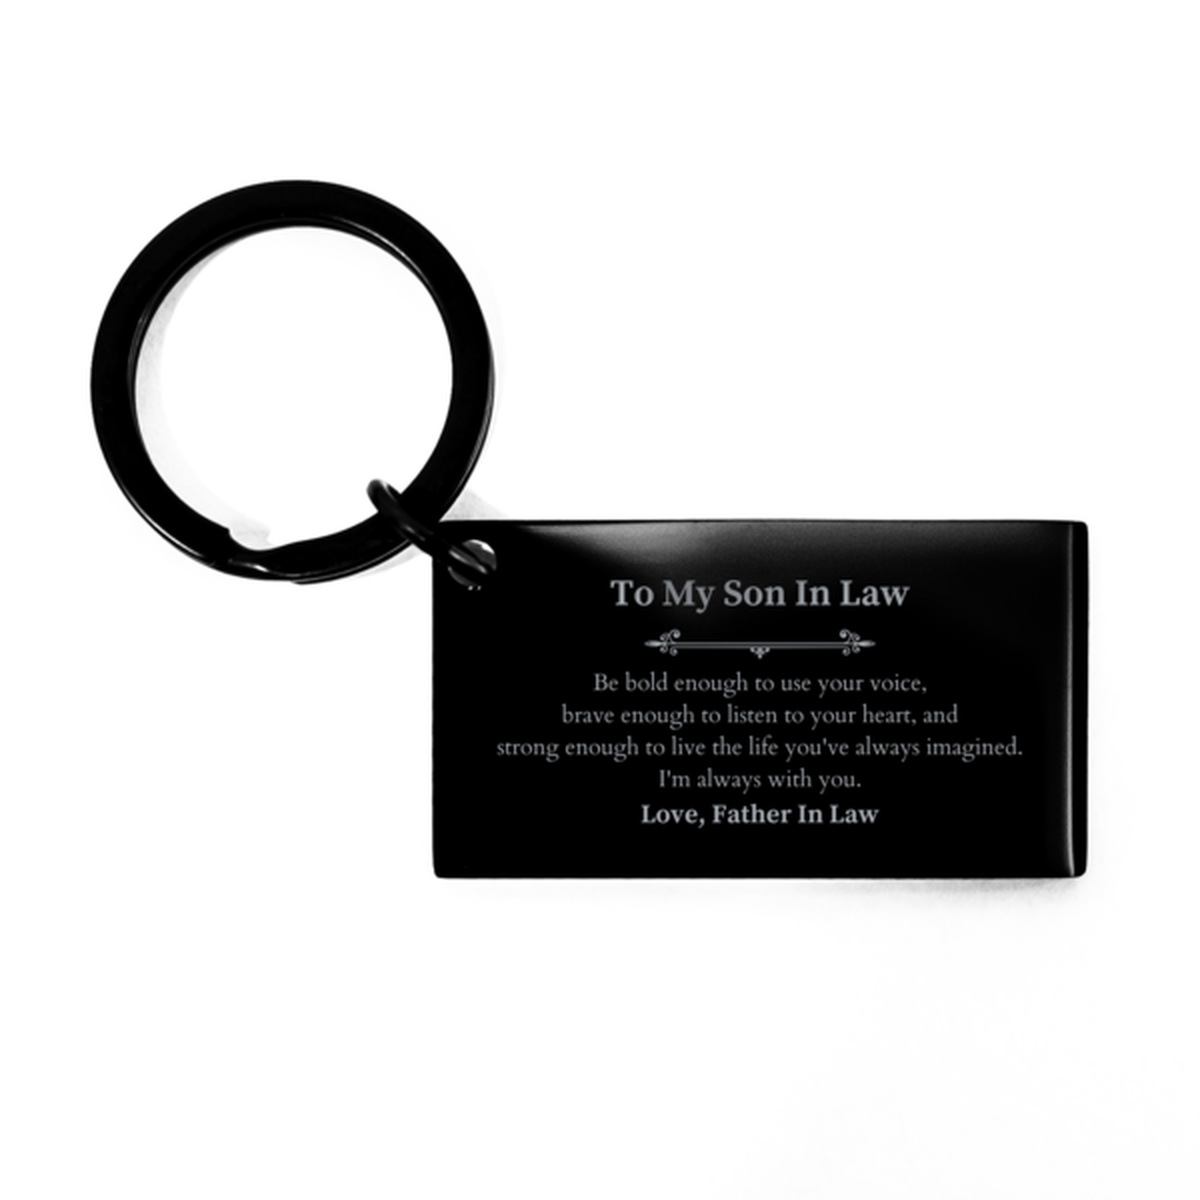 Keepsake Son In Law Keychain Gift Idea Graduation Christmas Birthday Son In Law from Father In Law, Son In Law Be bold enough to use your voice, brave enough to listen to your heart. Love, Father In Law